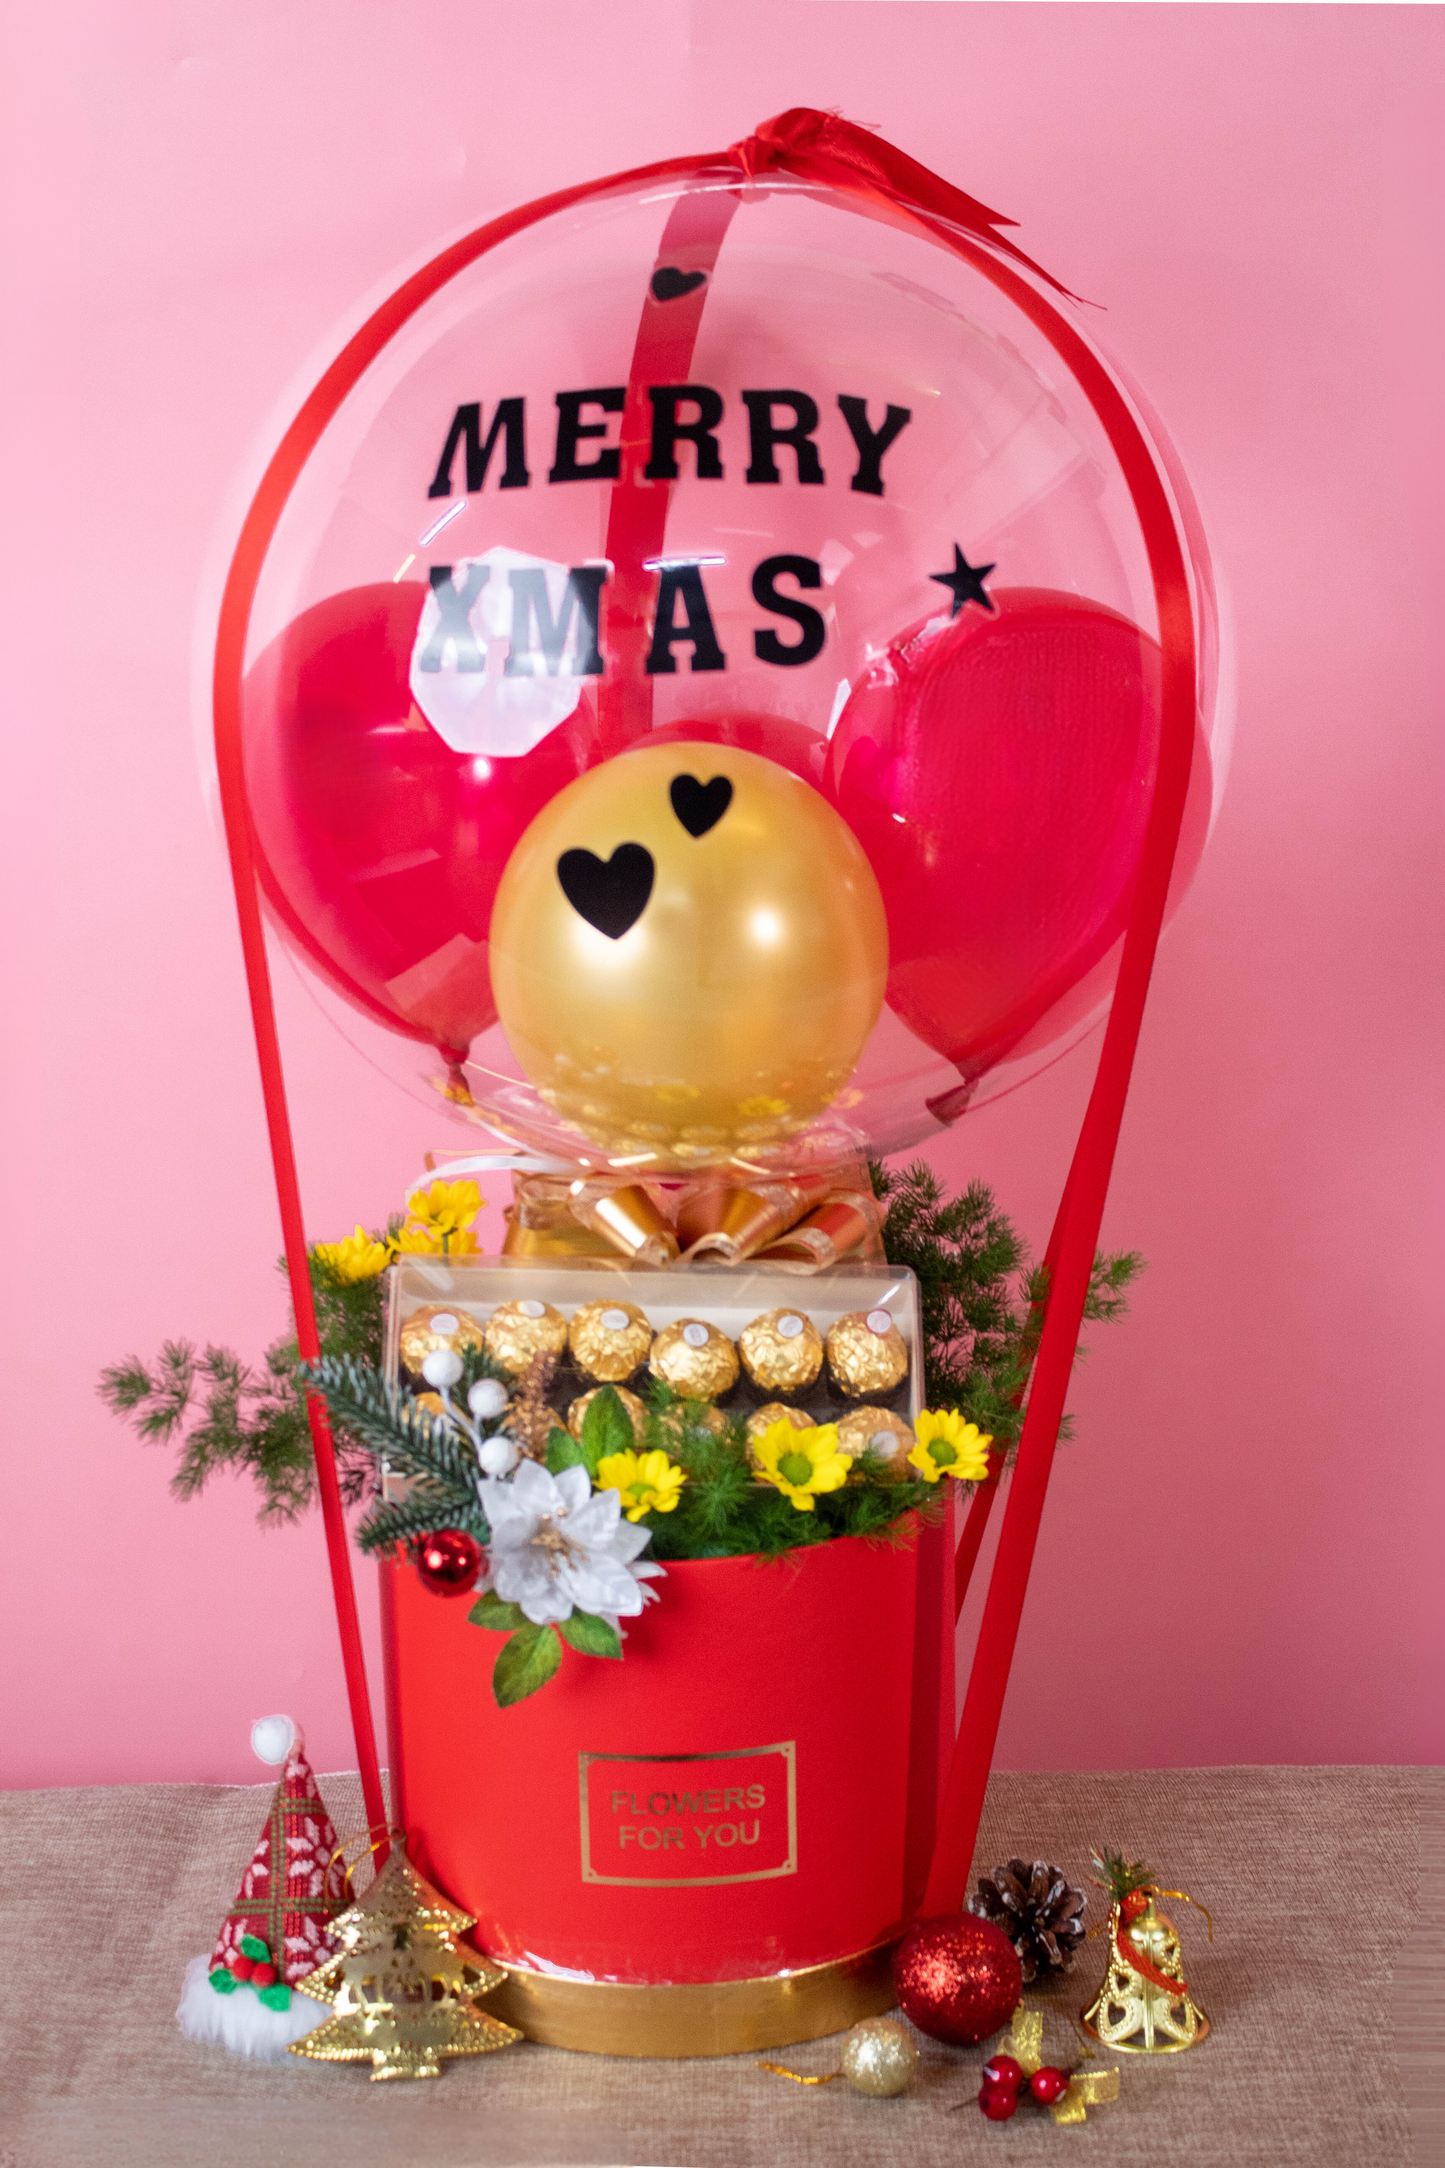 Christmas Bobo Balloon with Ferrero Rocher (Available in Klang Valley Only)